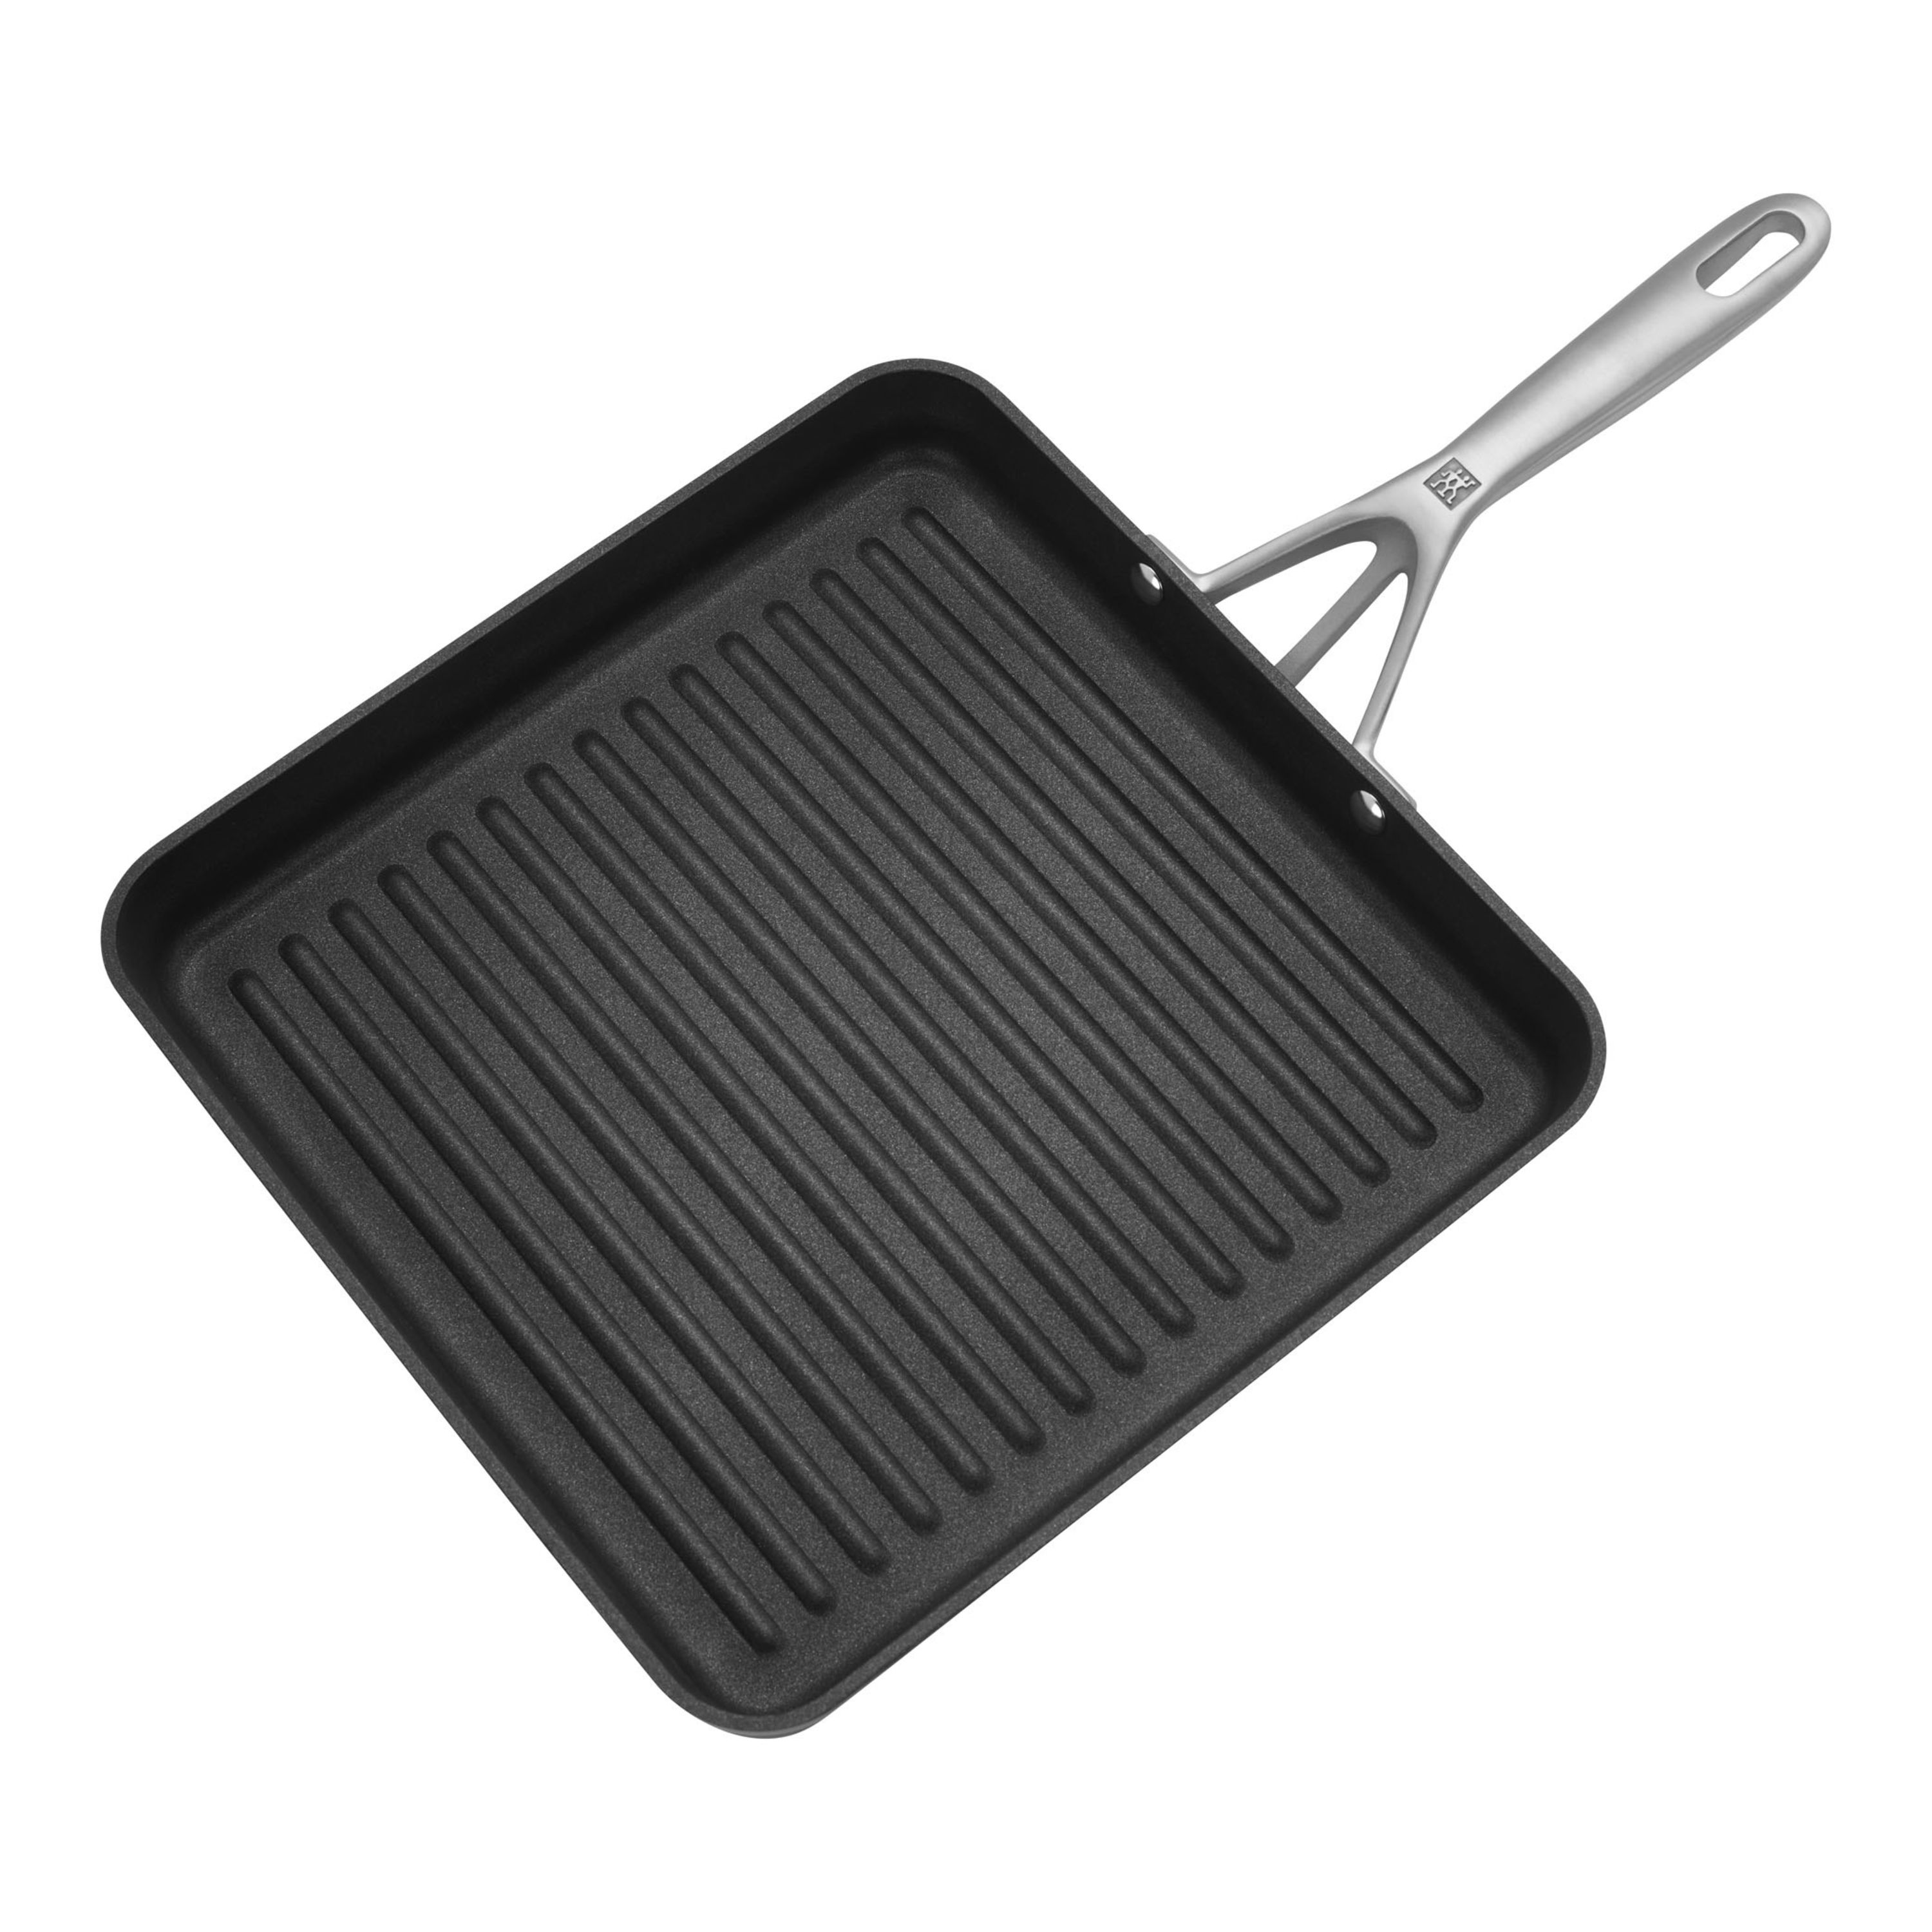 Ecolution Easy to Clean, Comfortable Handle, Even Heating, Dishwasher Safe  Pots and Pans, 11-Inch Griddle, Black